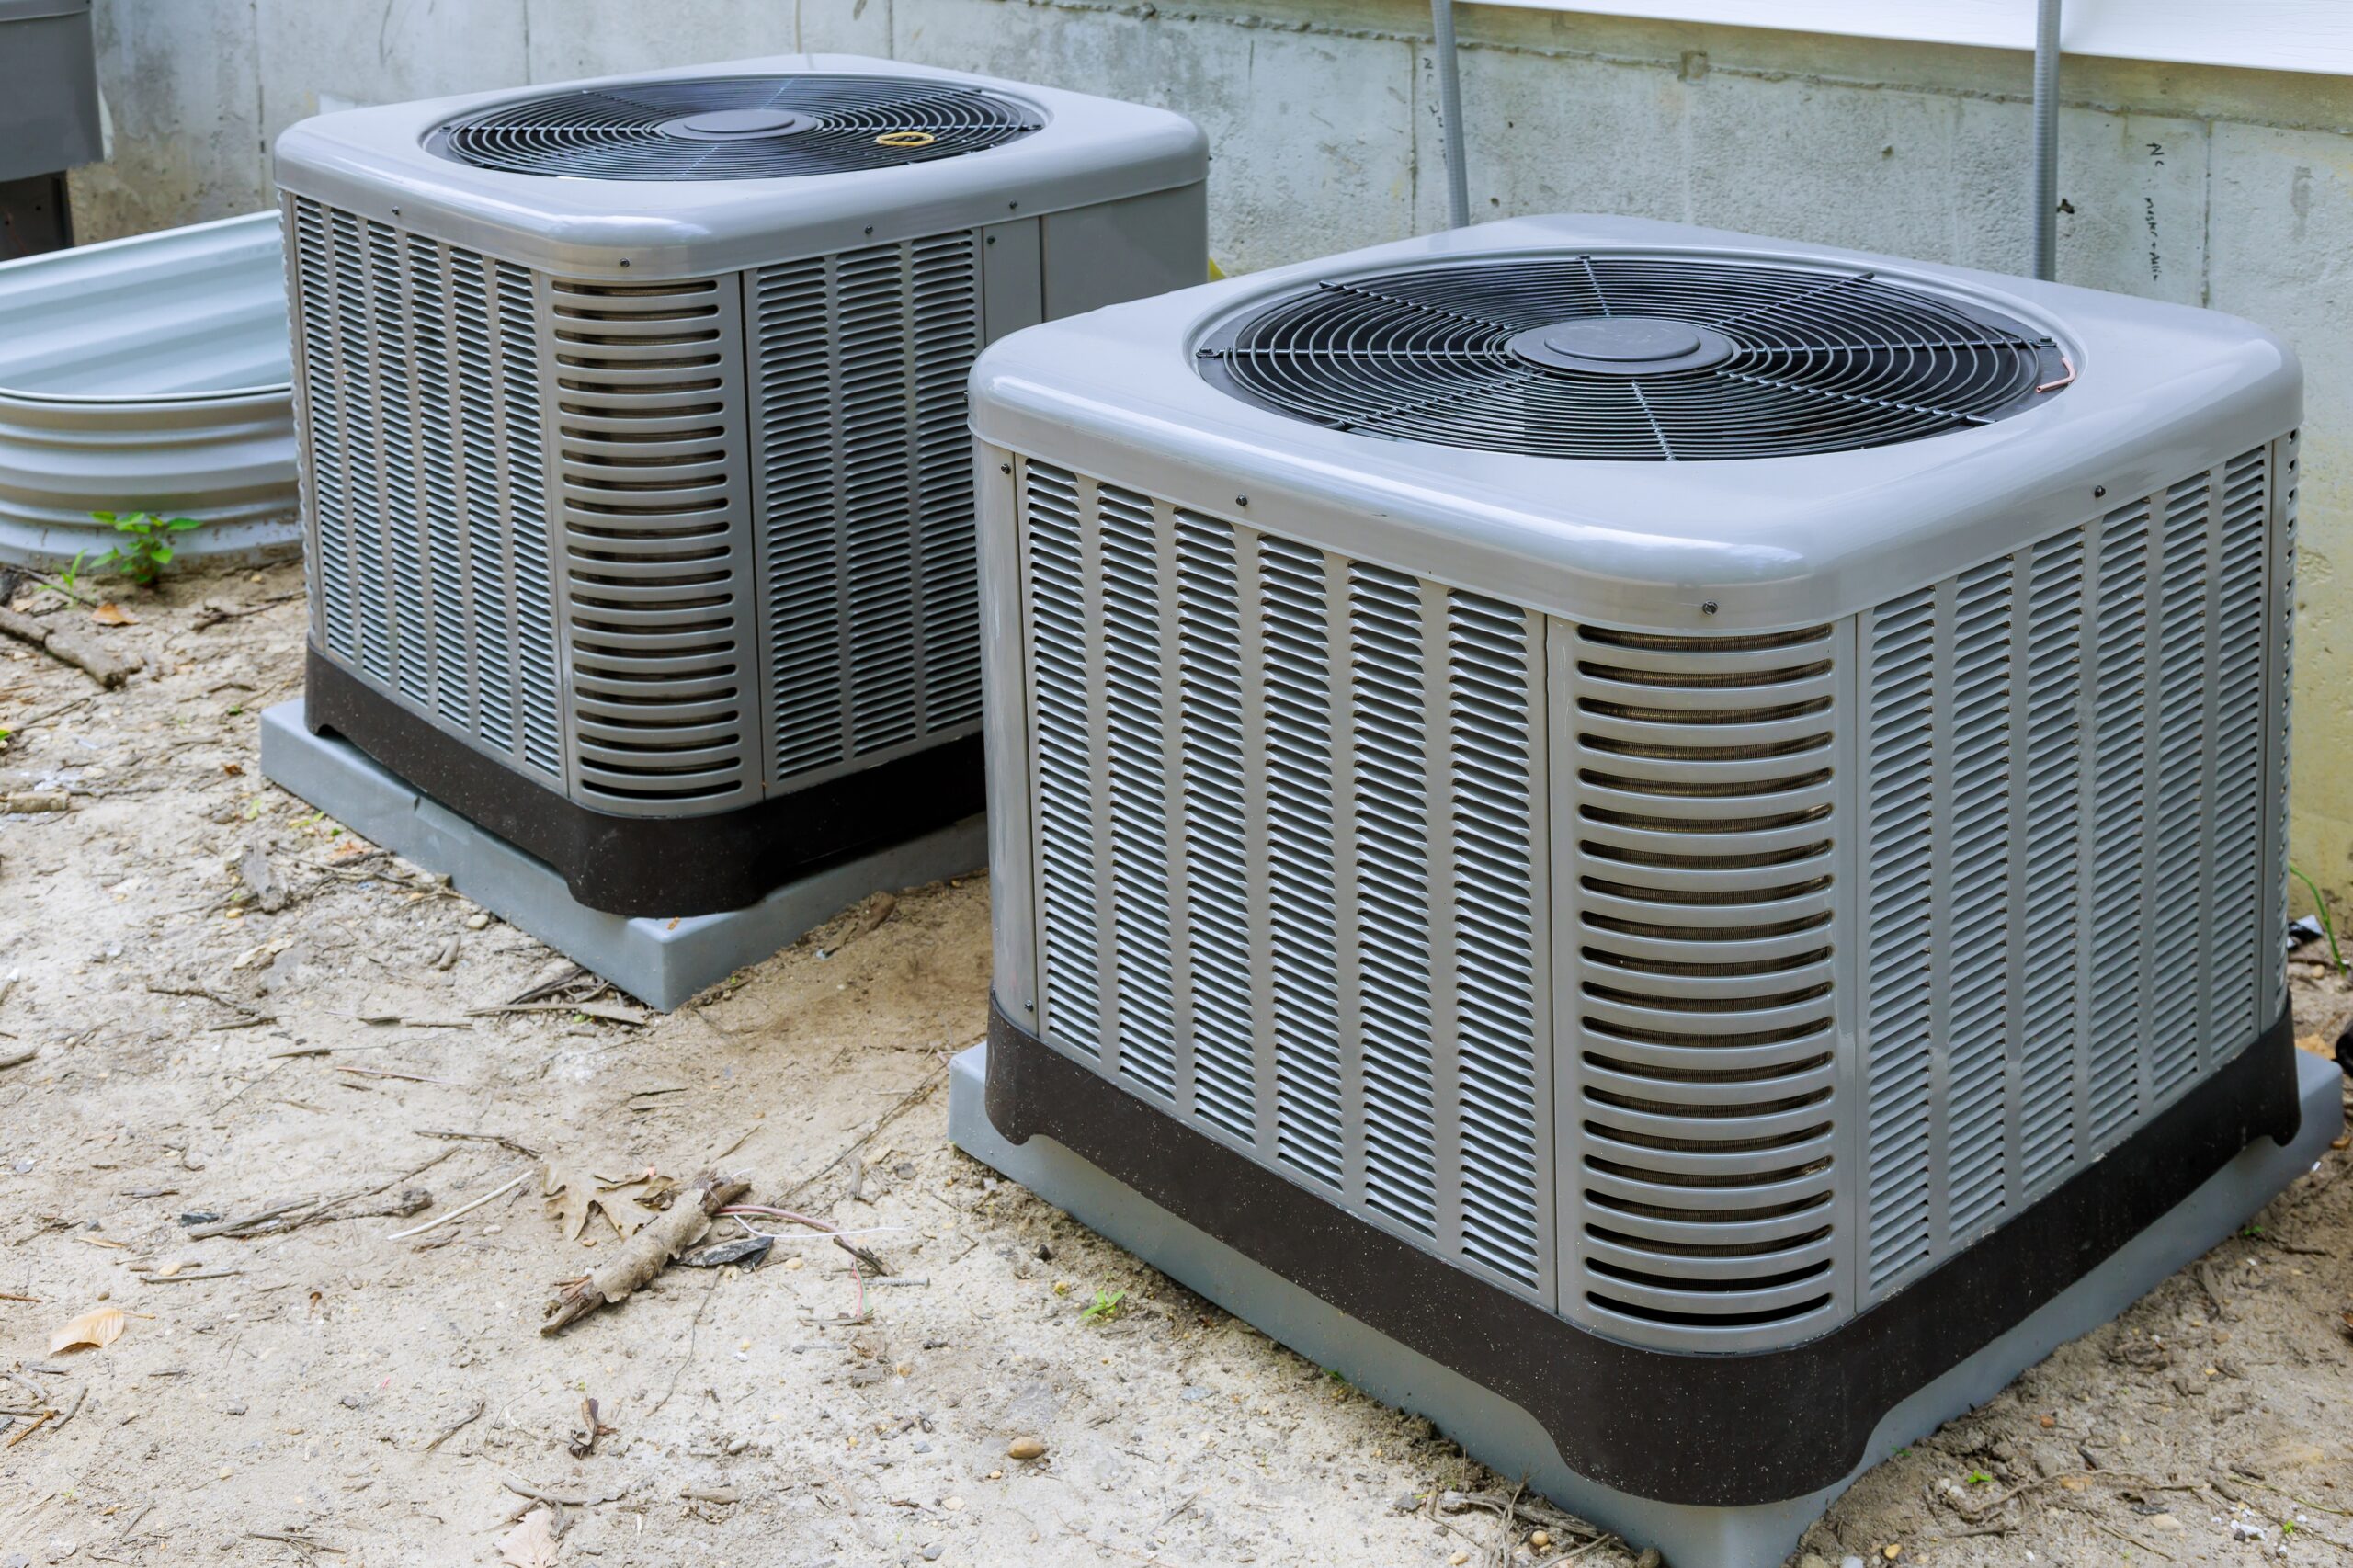 Can rain damage my air conditioner?